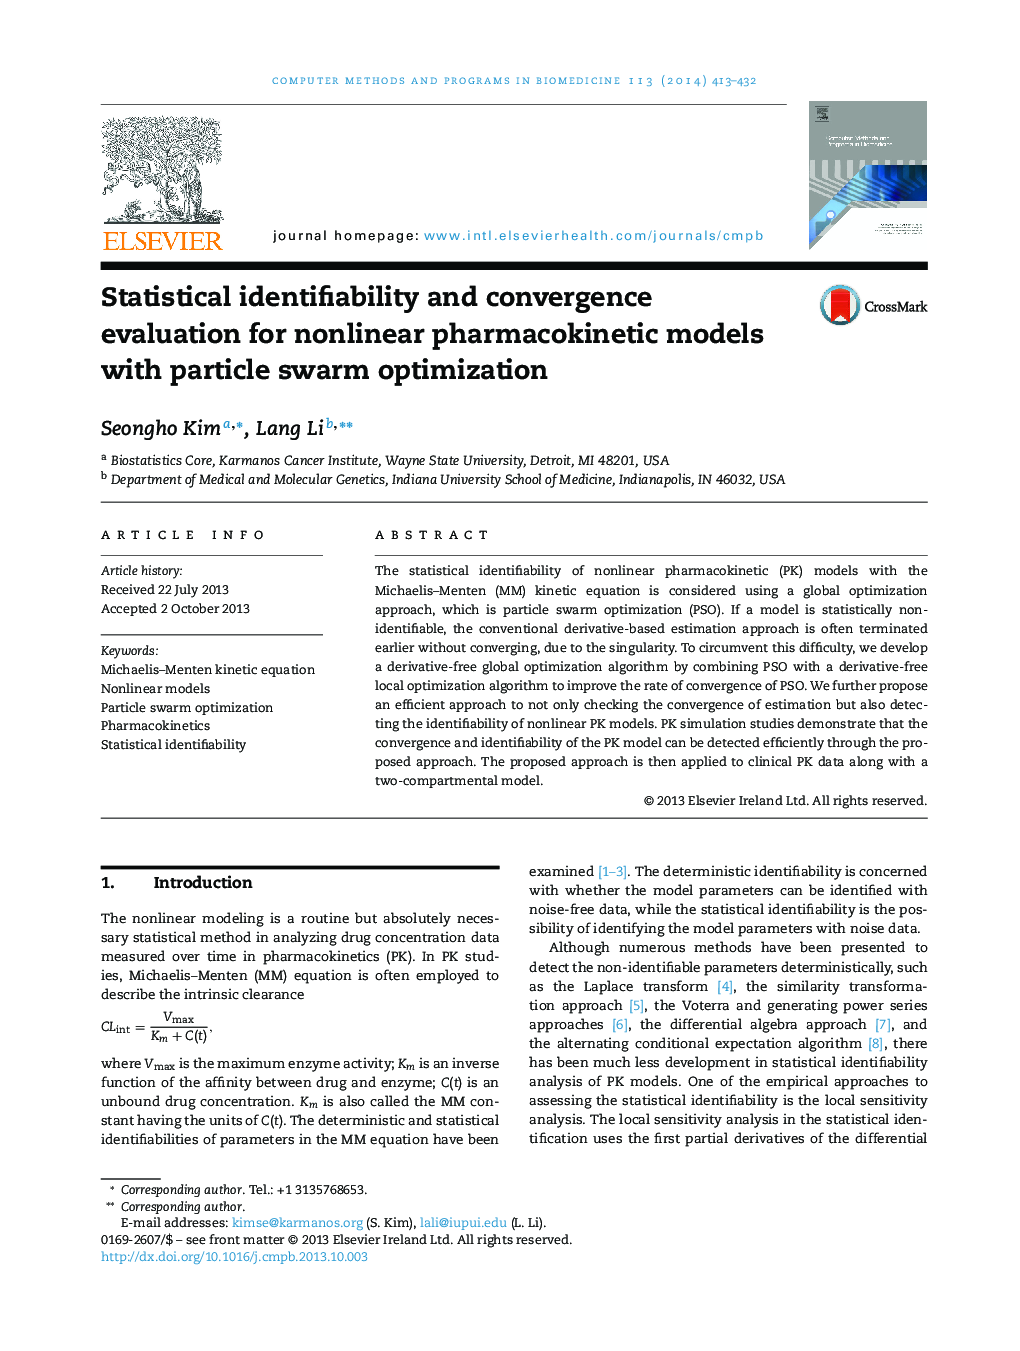 Statistical identifiability and convergence evaluation for nonlinear pharmacokinetic models with particle swarm optimization